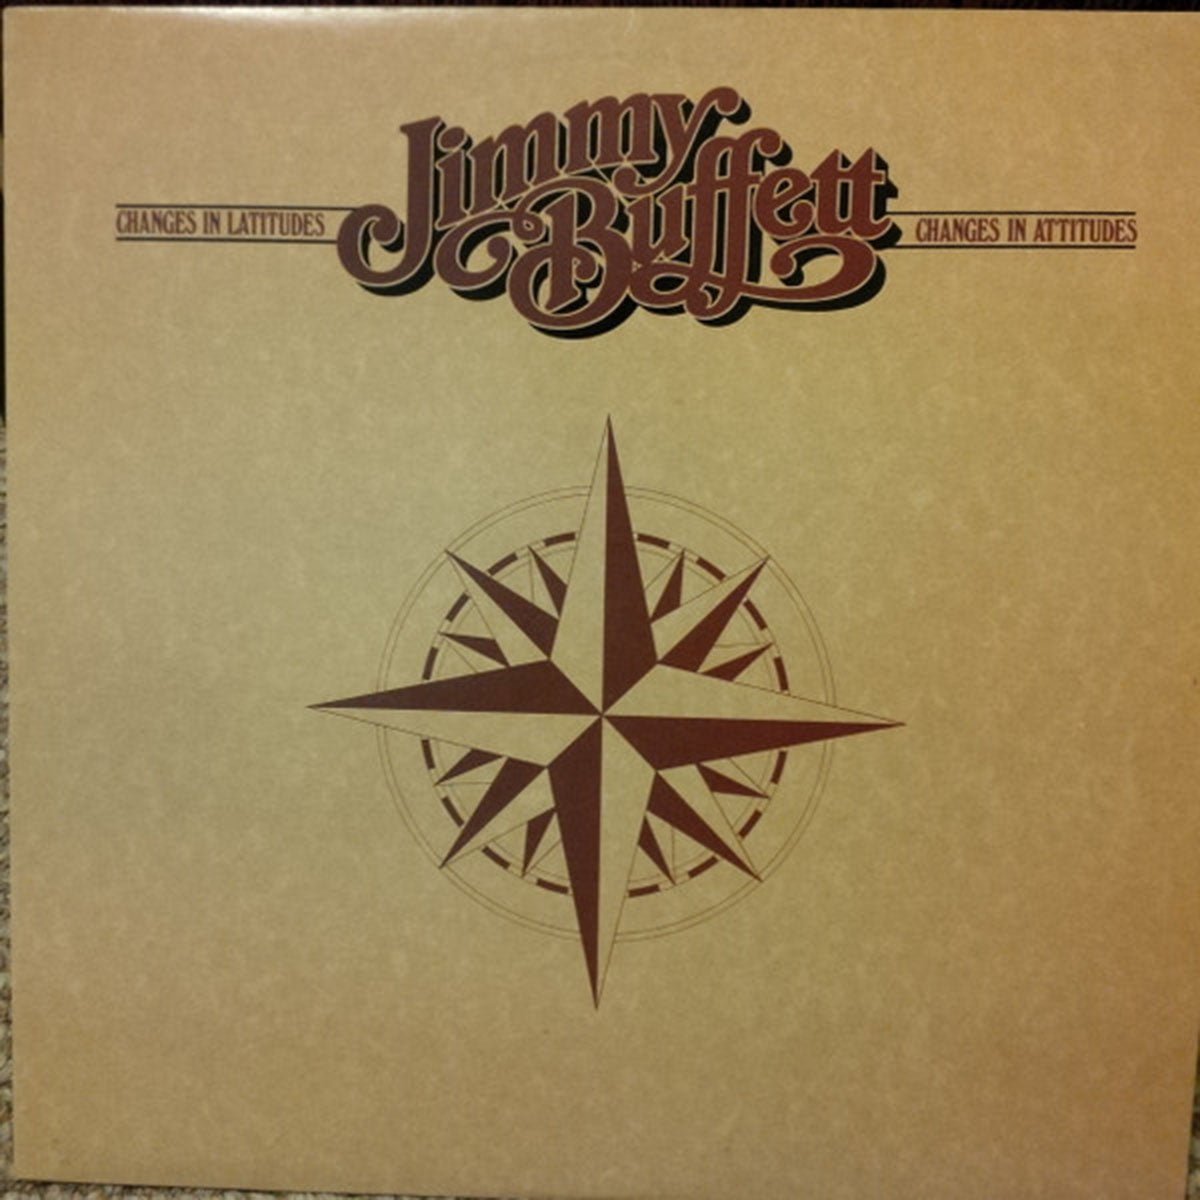 Jimmy Buffett – Changes In Latitudes, Changes In Attitudes - 1980